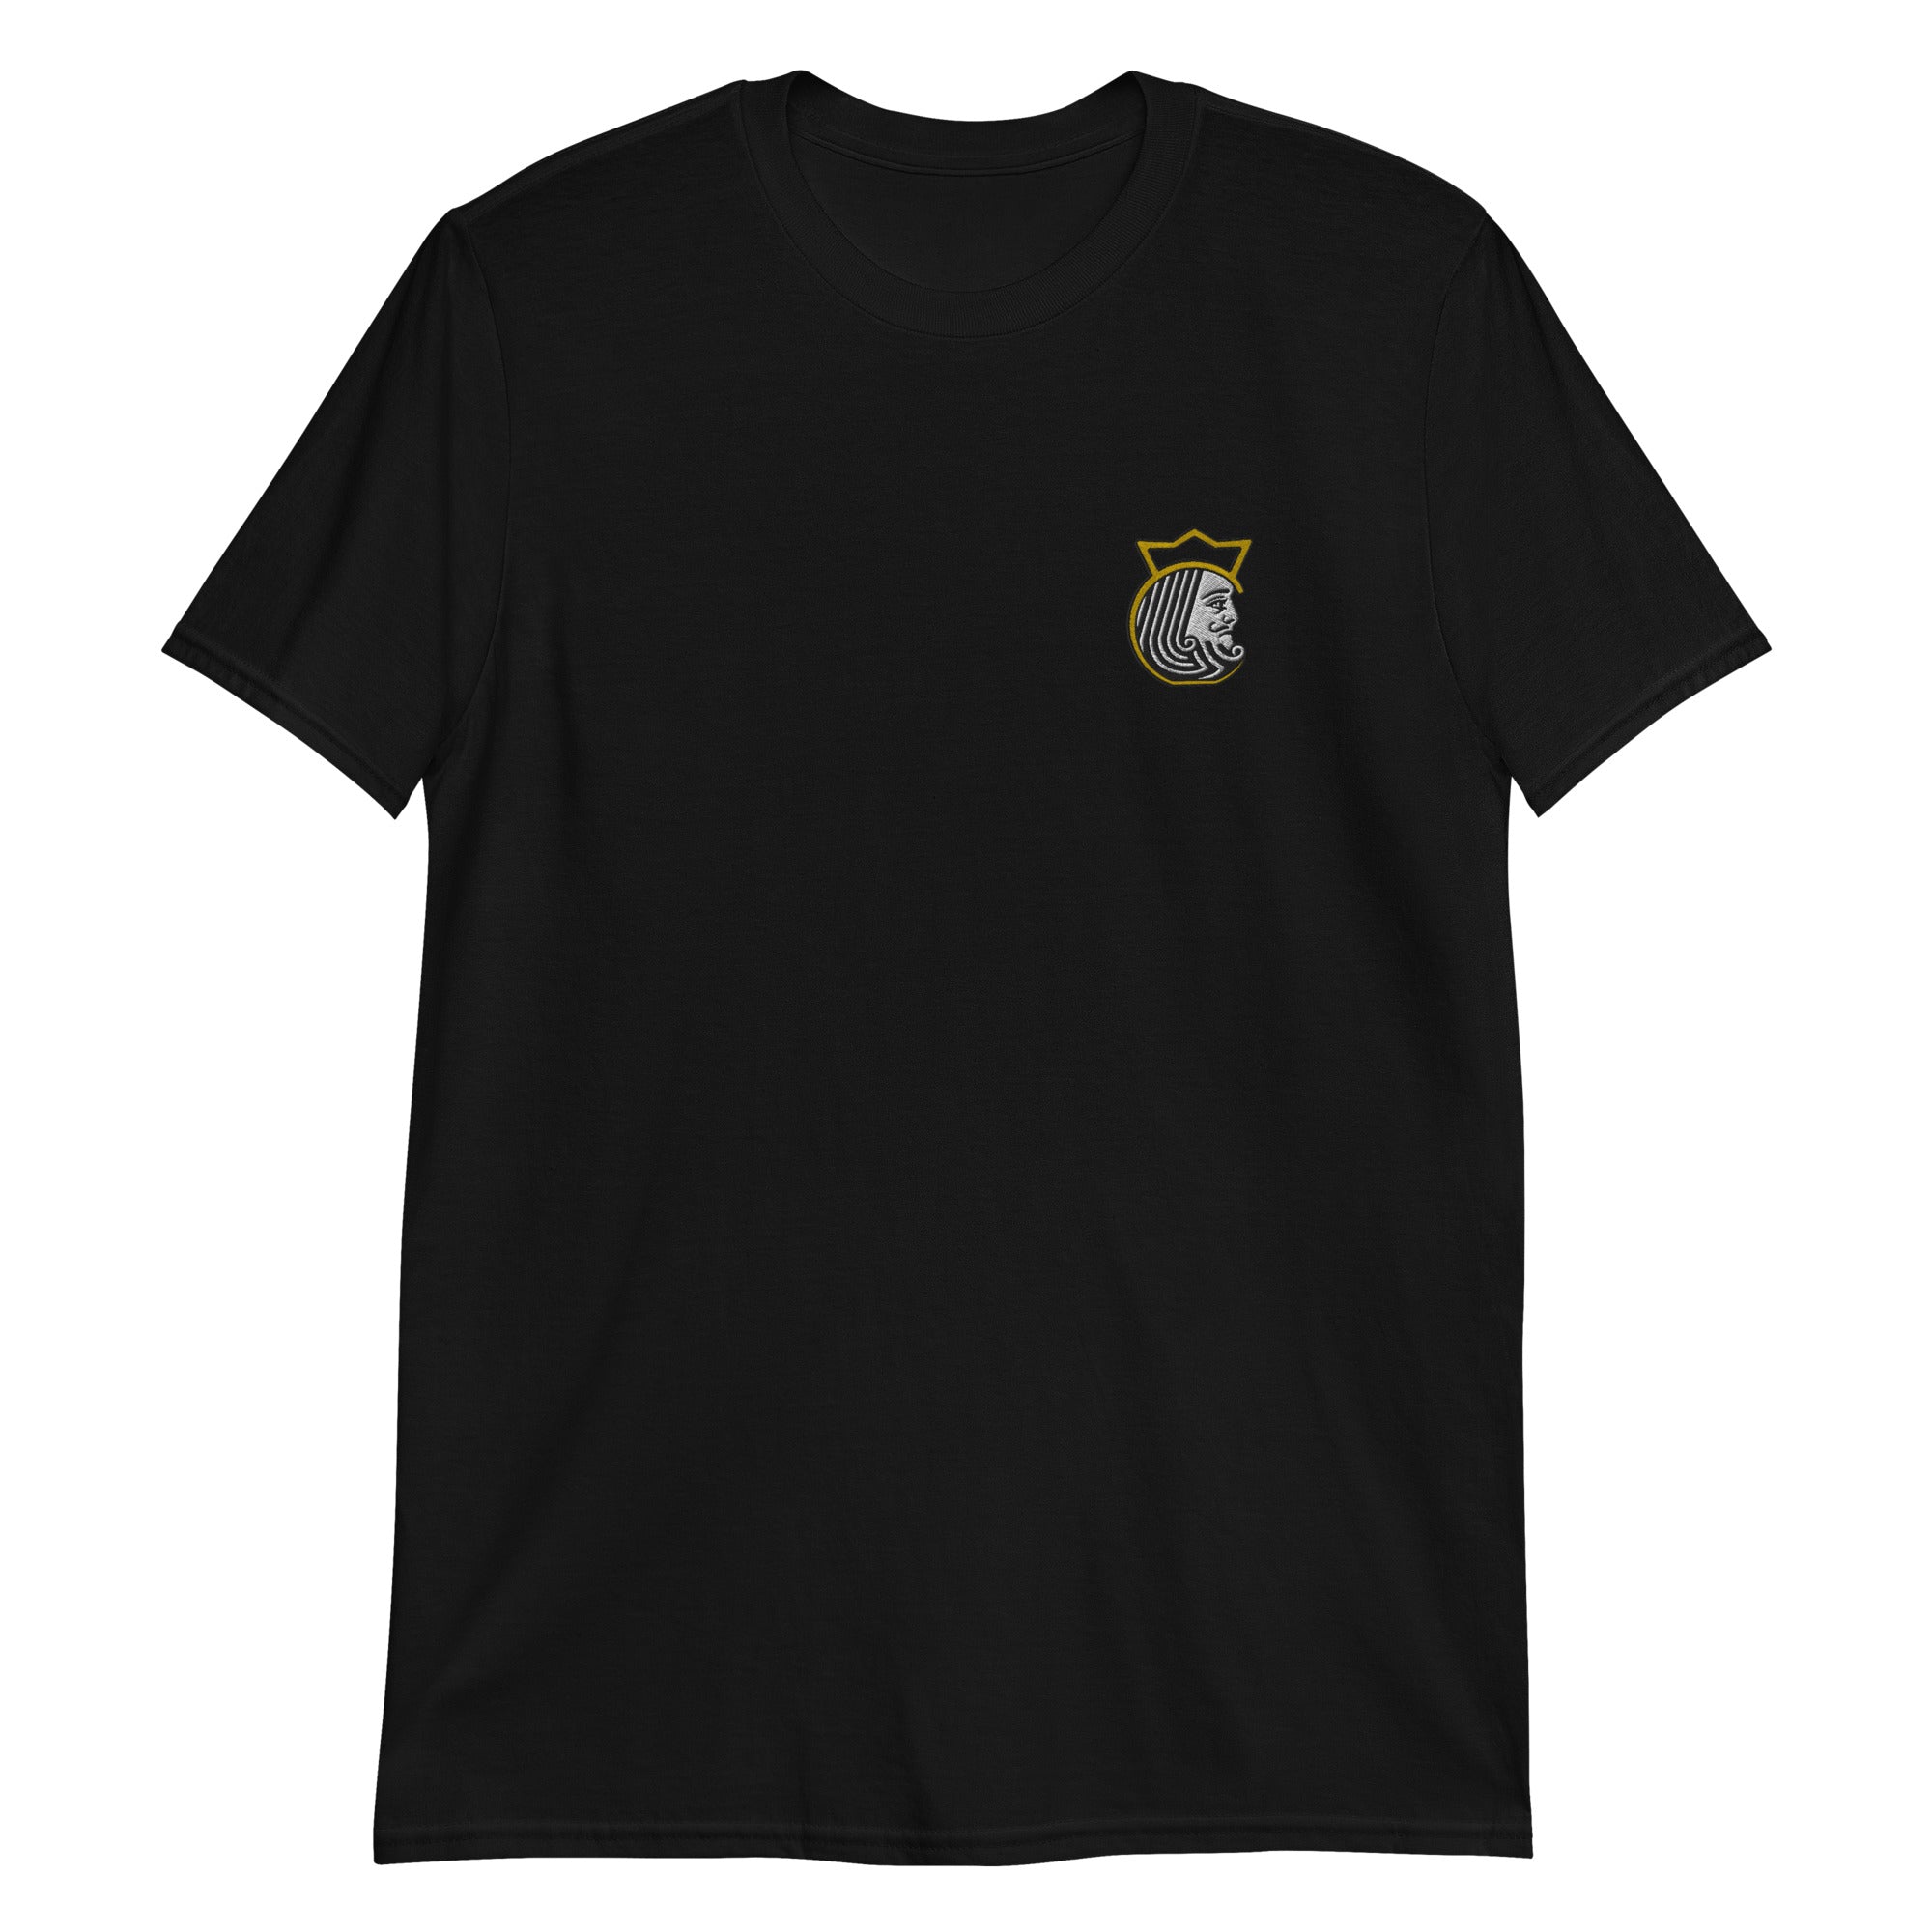 The King's Premium Embroidered Tee-Kettlebell Kings